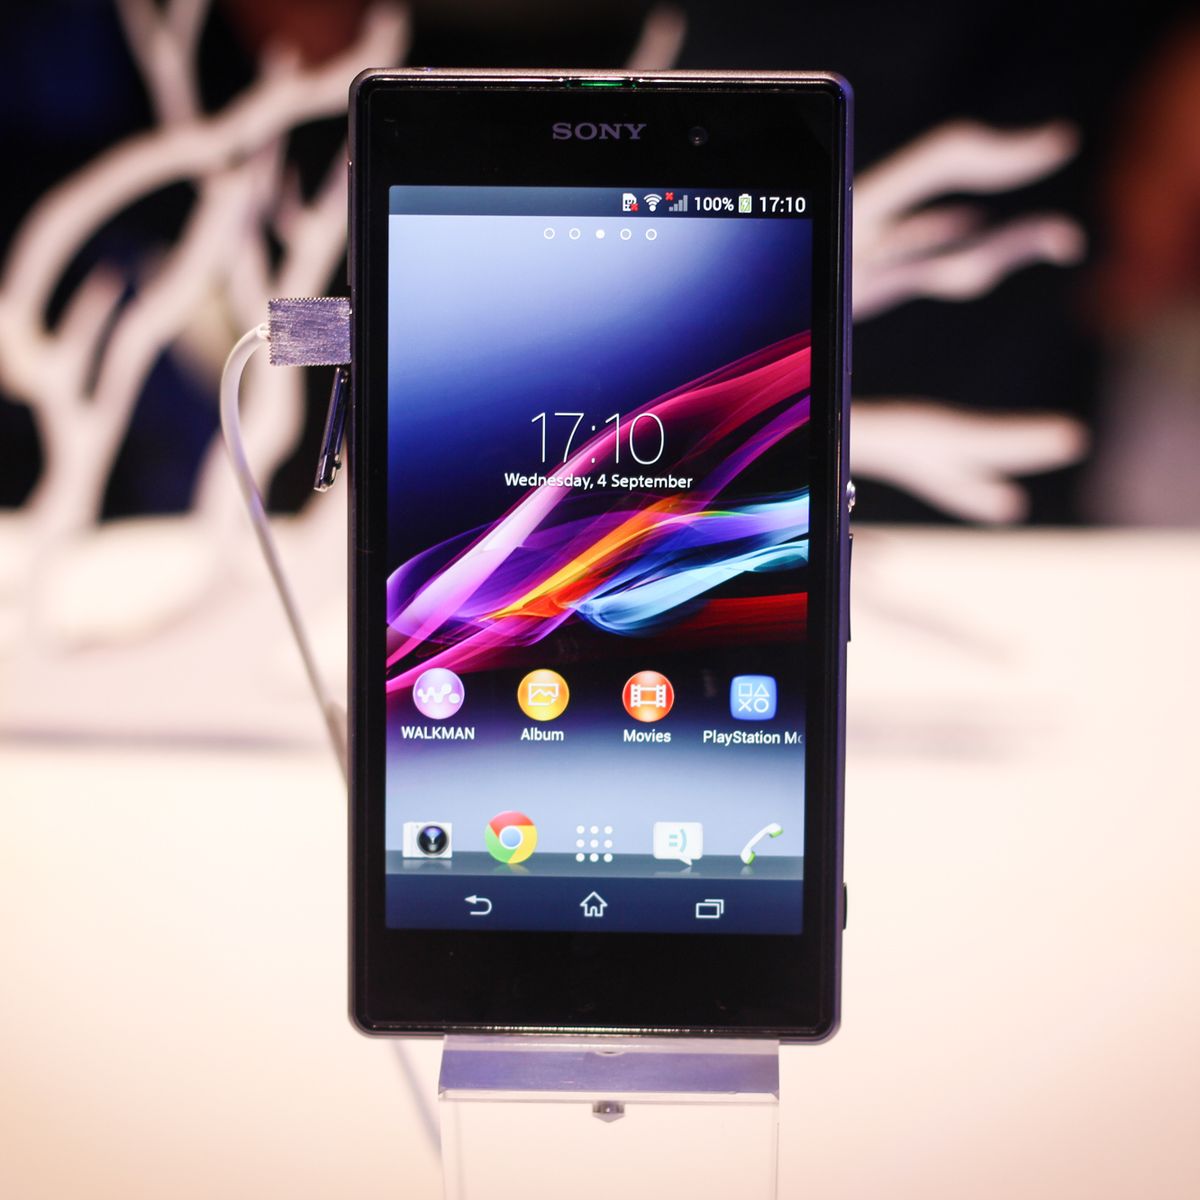 Sony Xperia hands-on